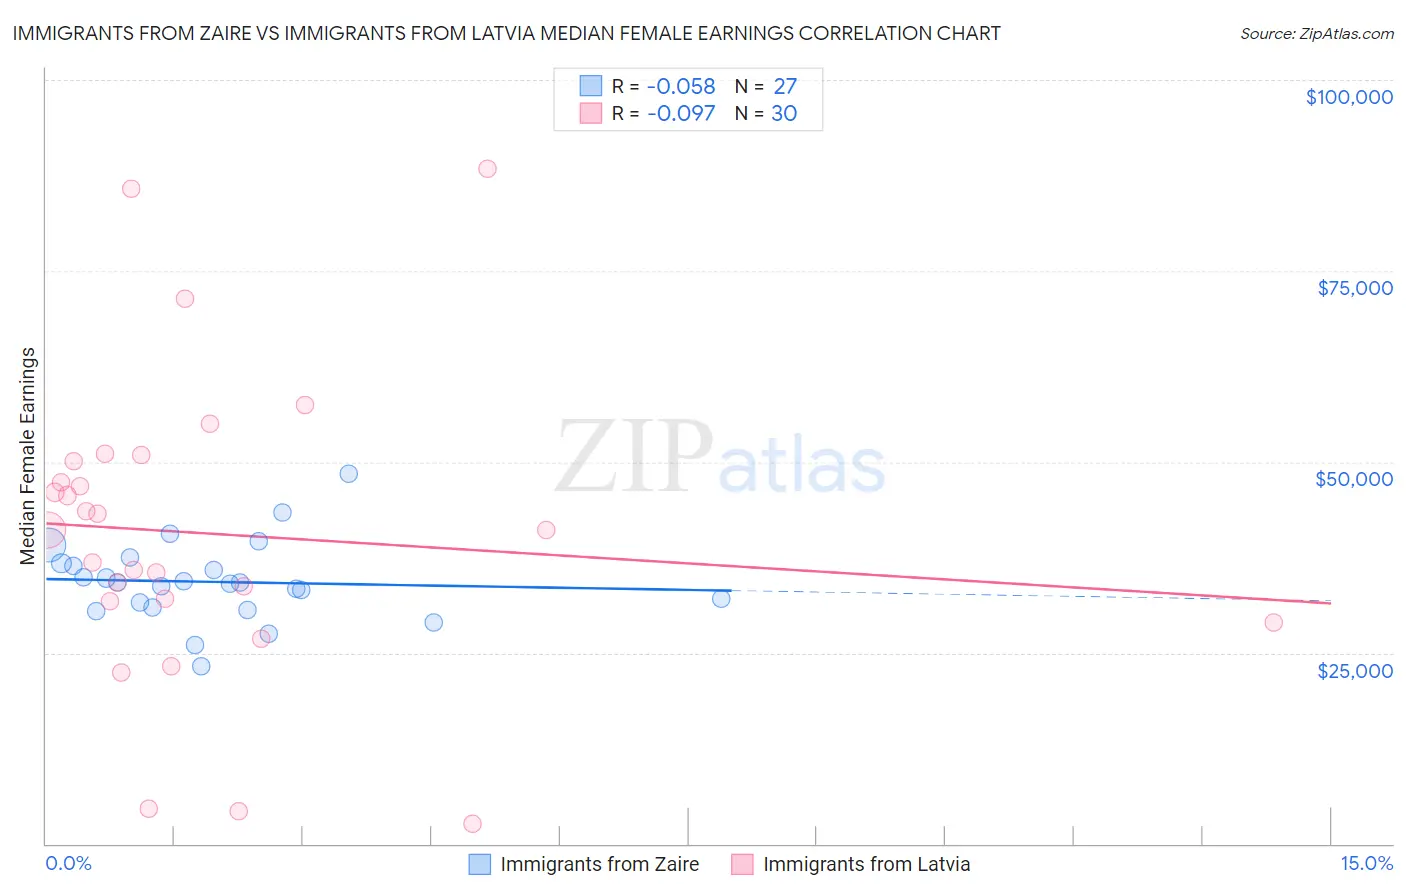 Immigrants from Zaire vs Immigrants from Latvia Median Female Earnings